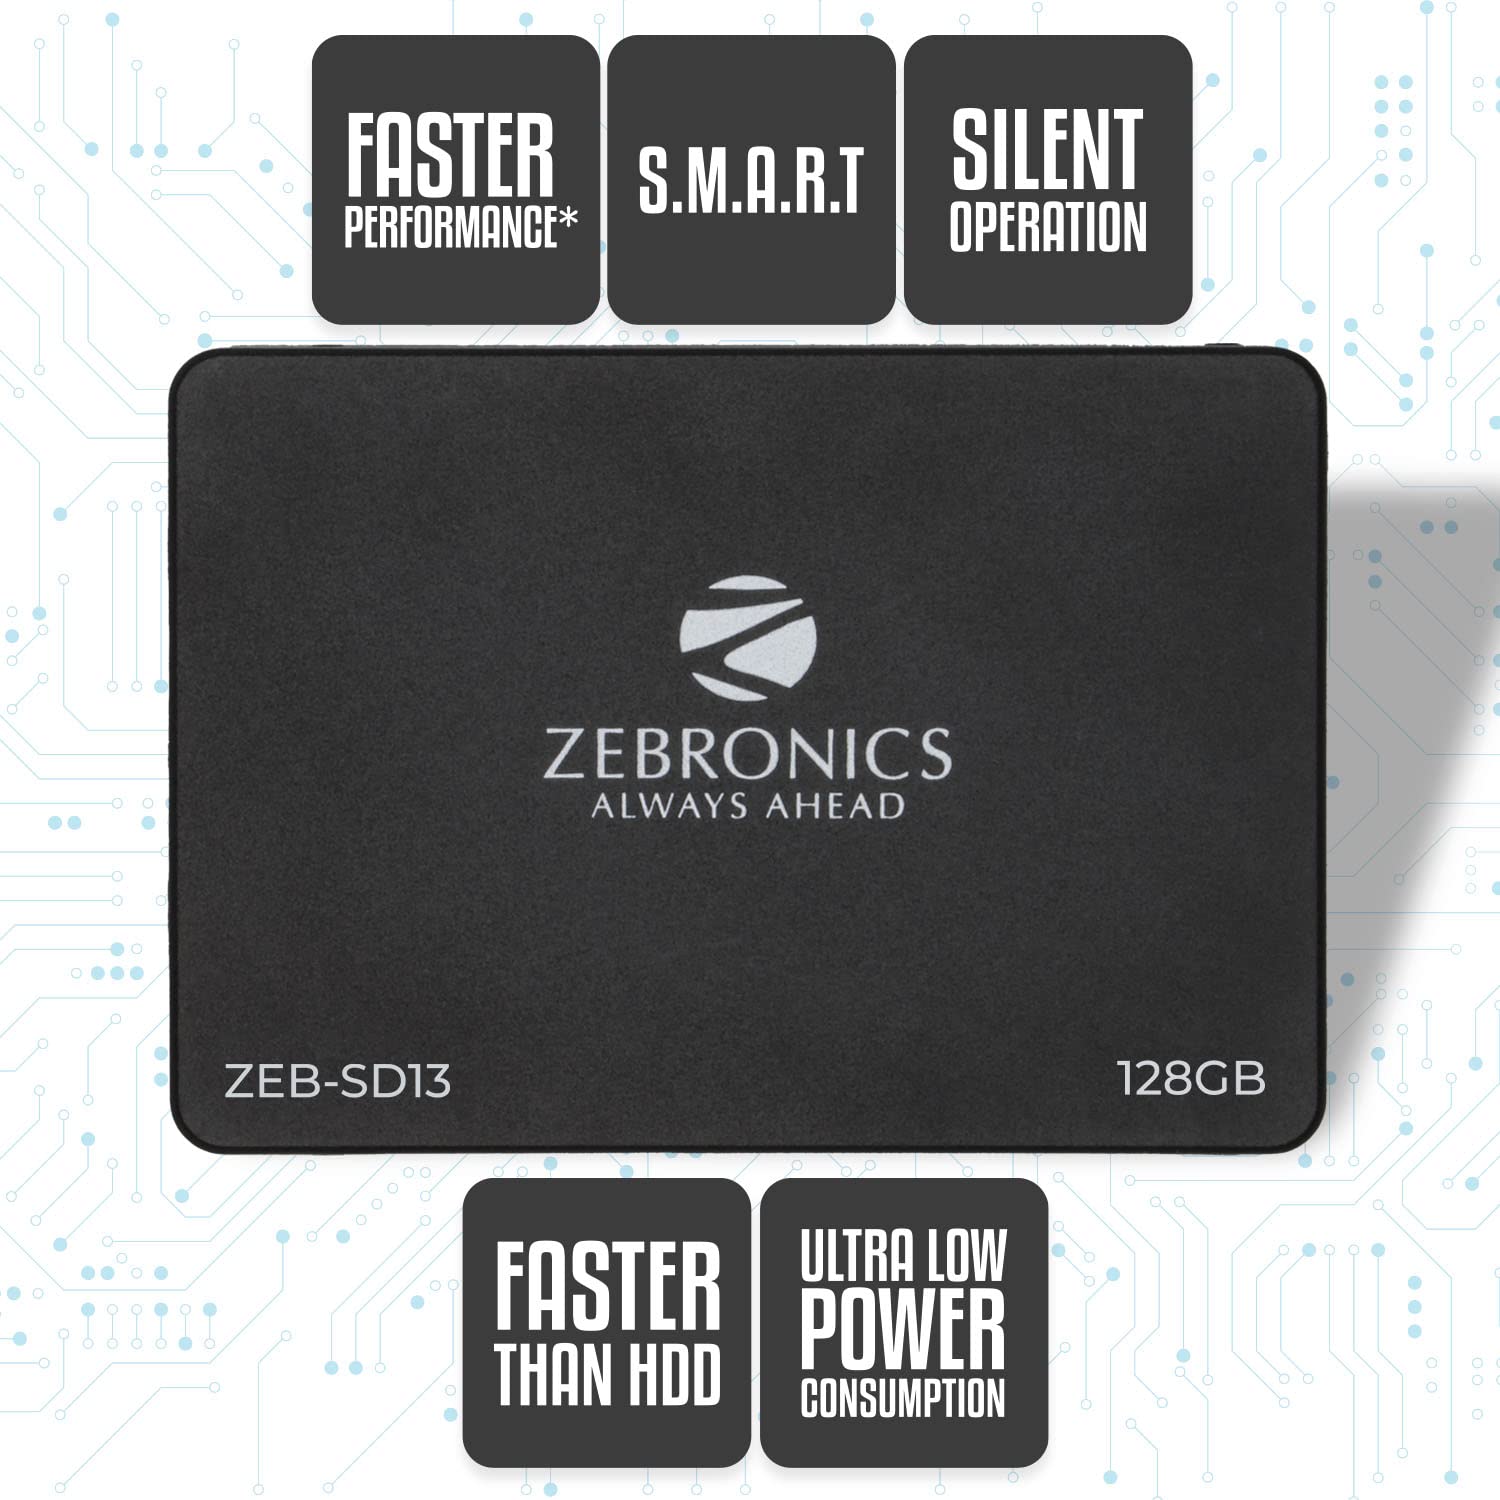 ZEBRONICS Zeb-SD13 128GB SSD, Ultra Low Power Consumption, S.M.A.R.T. Thermal Management and Silent Operation.